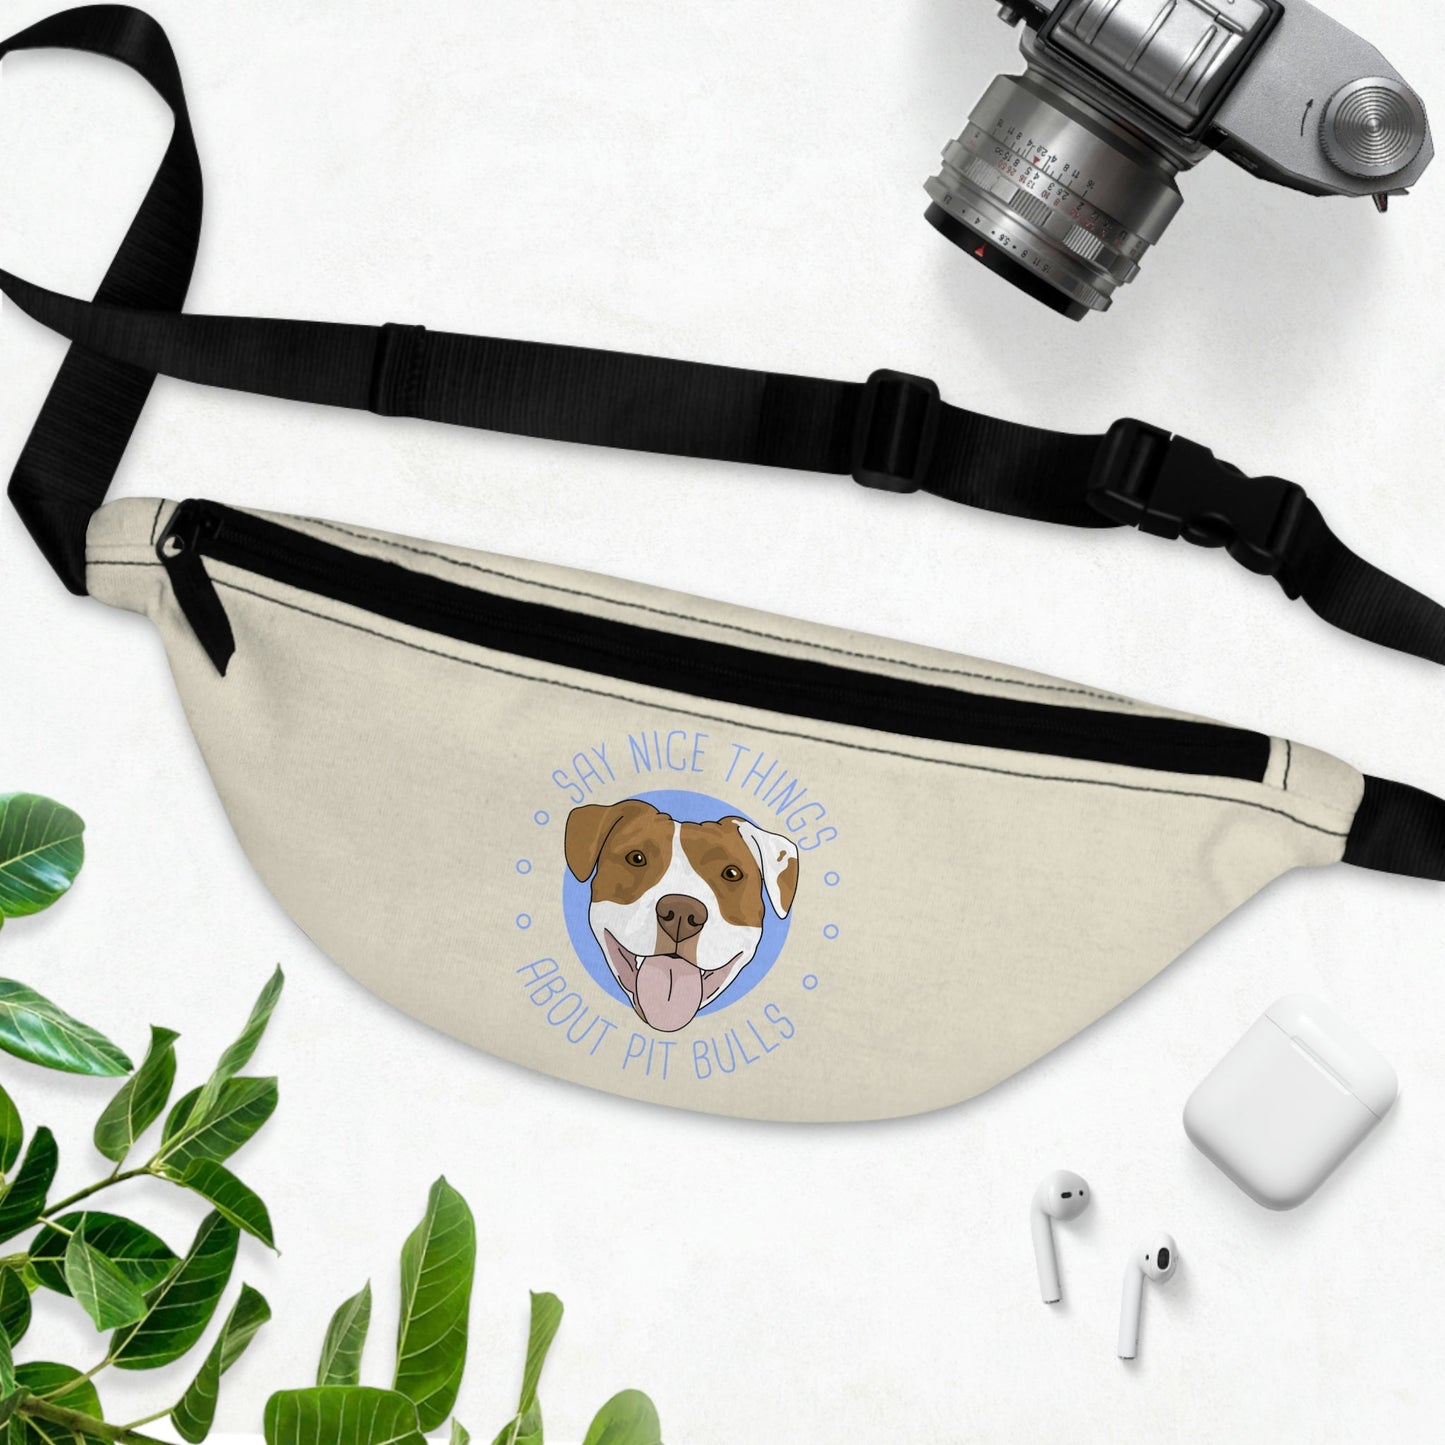 Say Nice Things About Pit Bulls | Treat Pouch - Detezi Designs-31479070605887741477